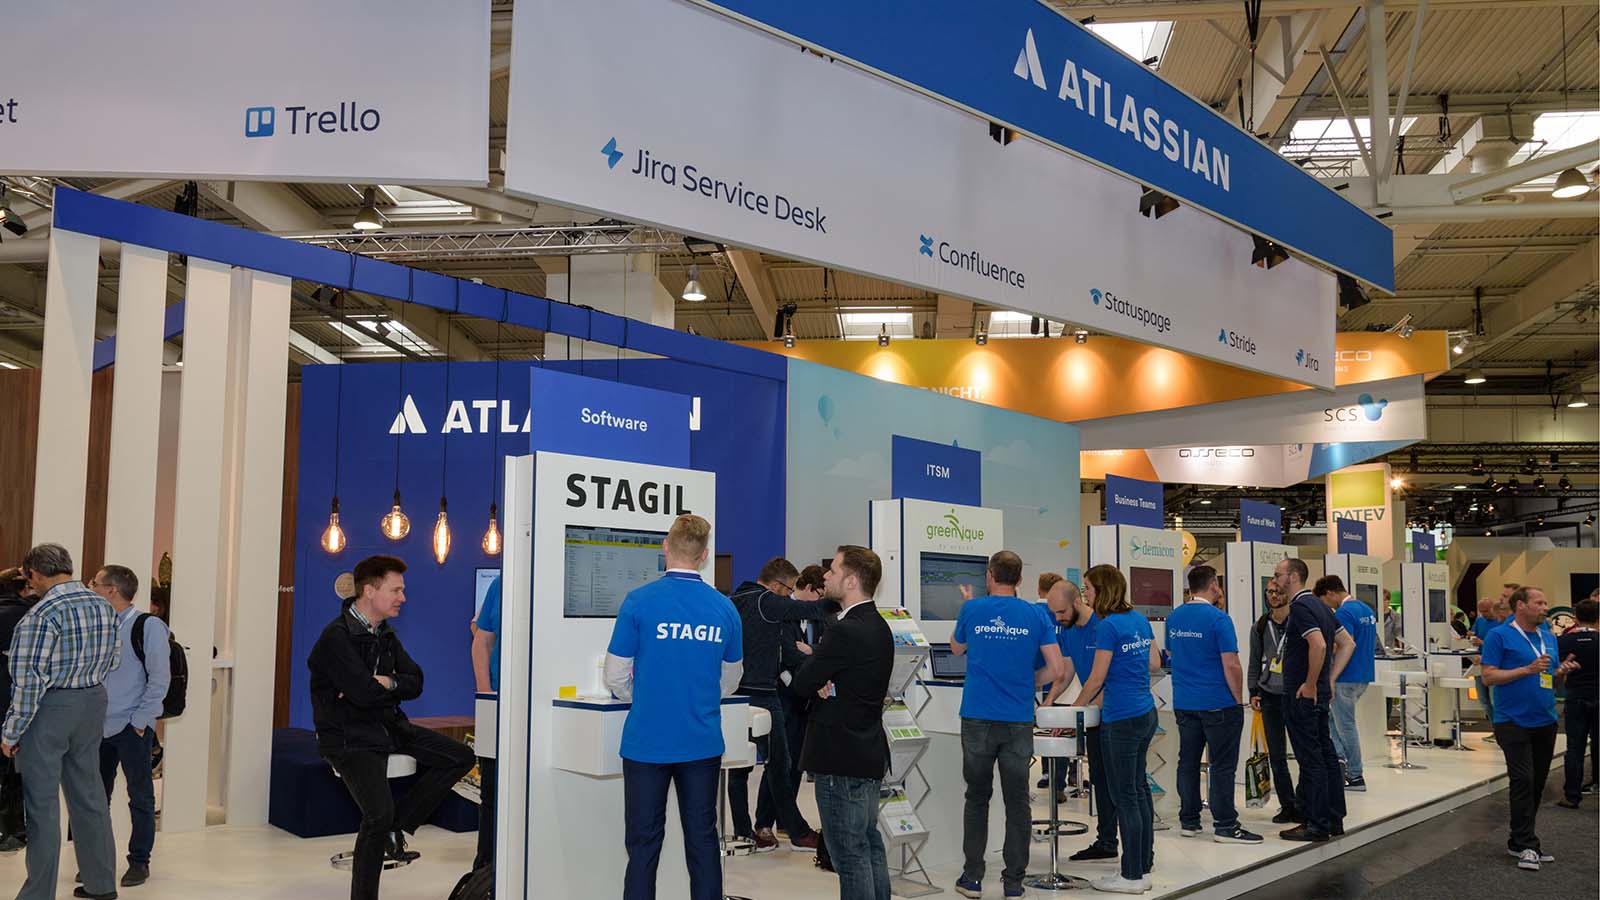 Atlassian (TEAM) employees stand at a convention booth in Hanover, Germany.